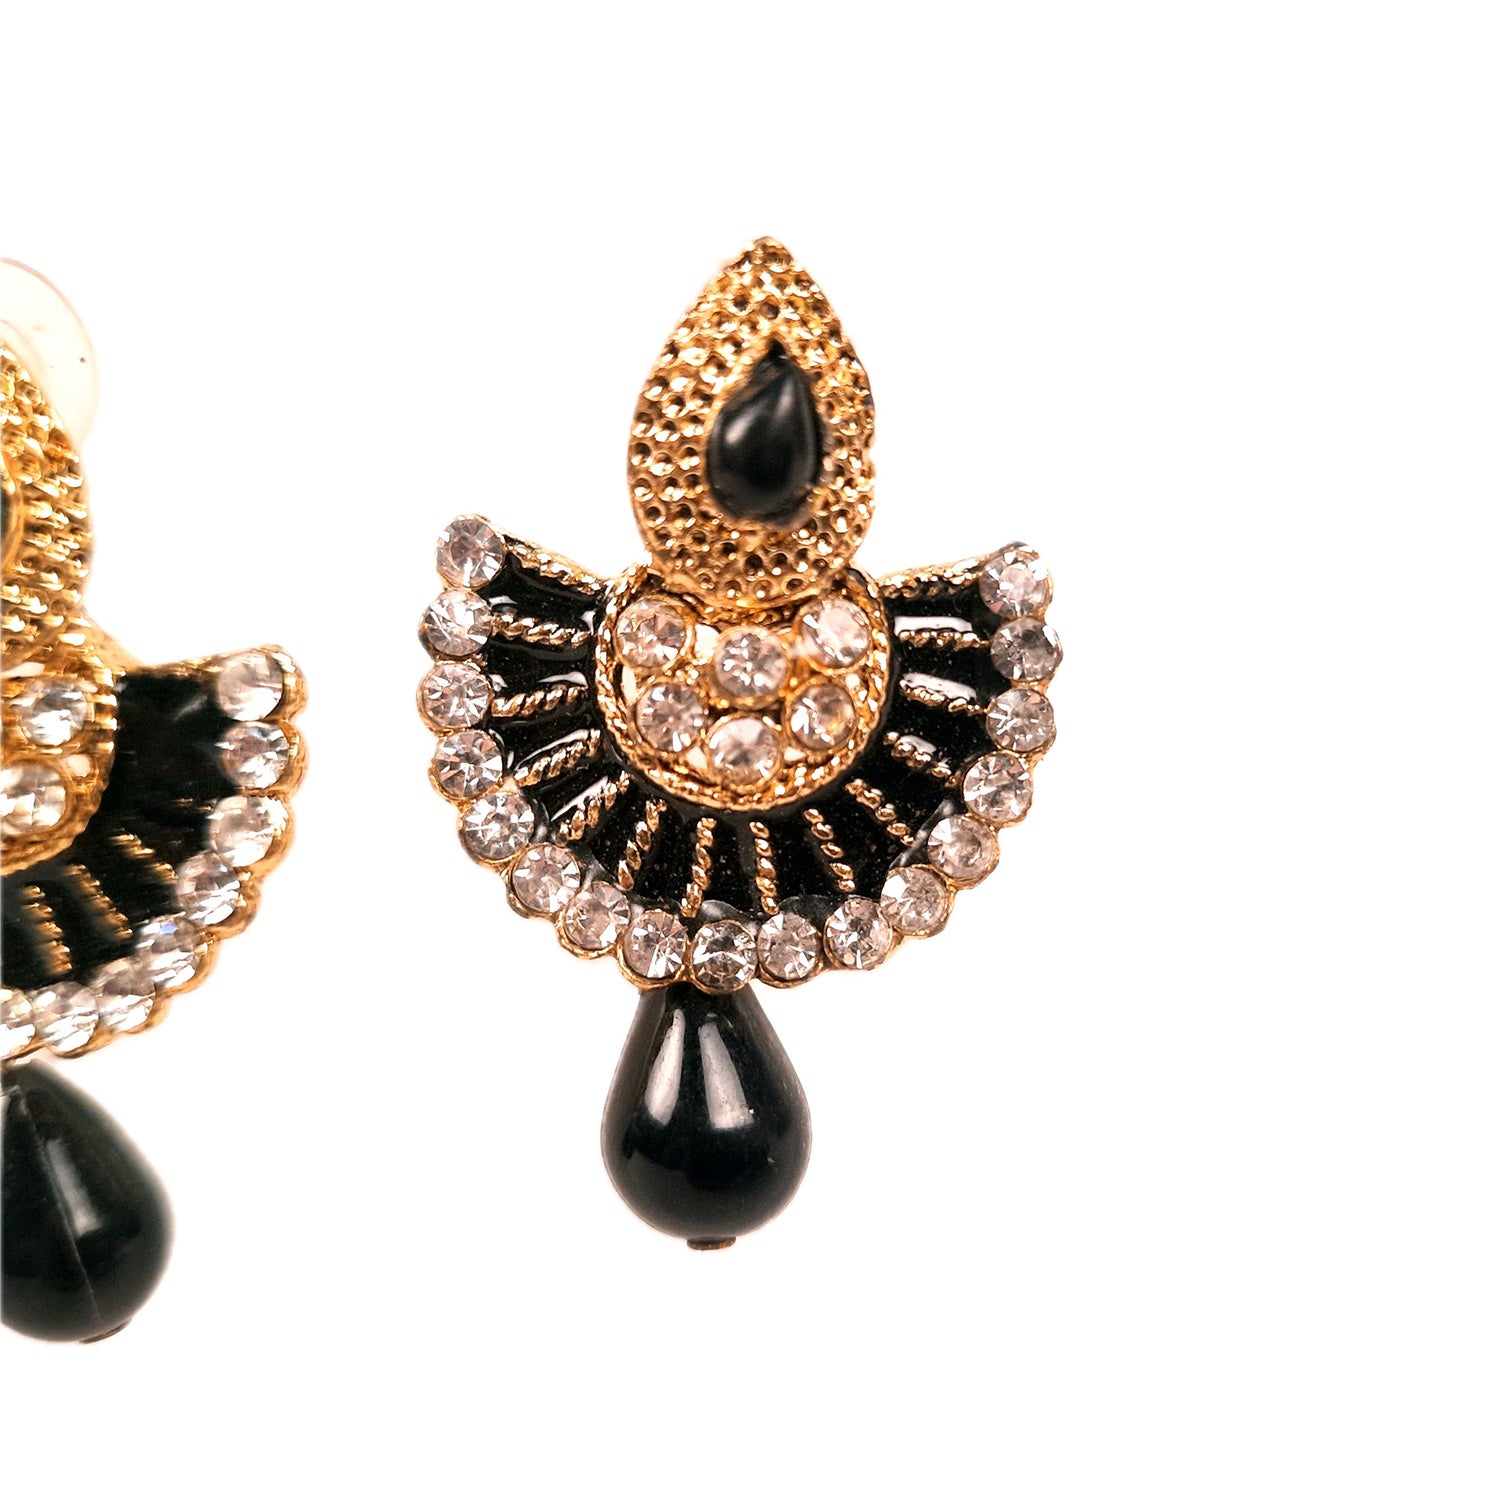 Earring Stud - Black Floral Drop Earrings | Latest Stylish Fashion Jewellery | Gifts for Her, Friendship Day, Valentine's Day Gift - apkamart